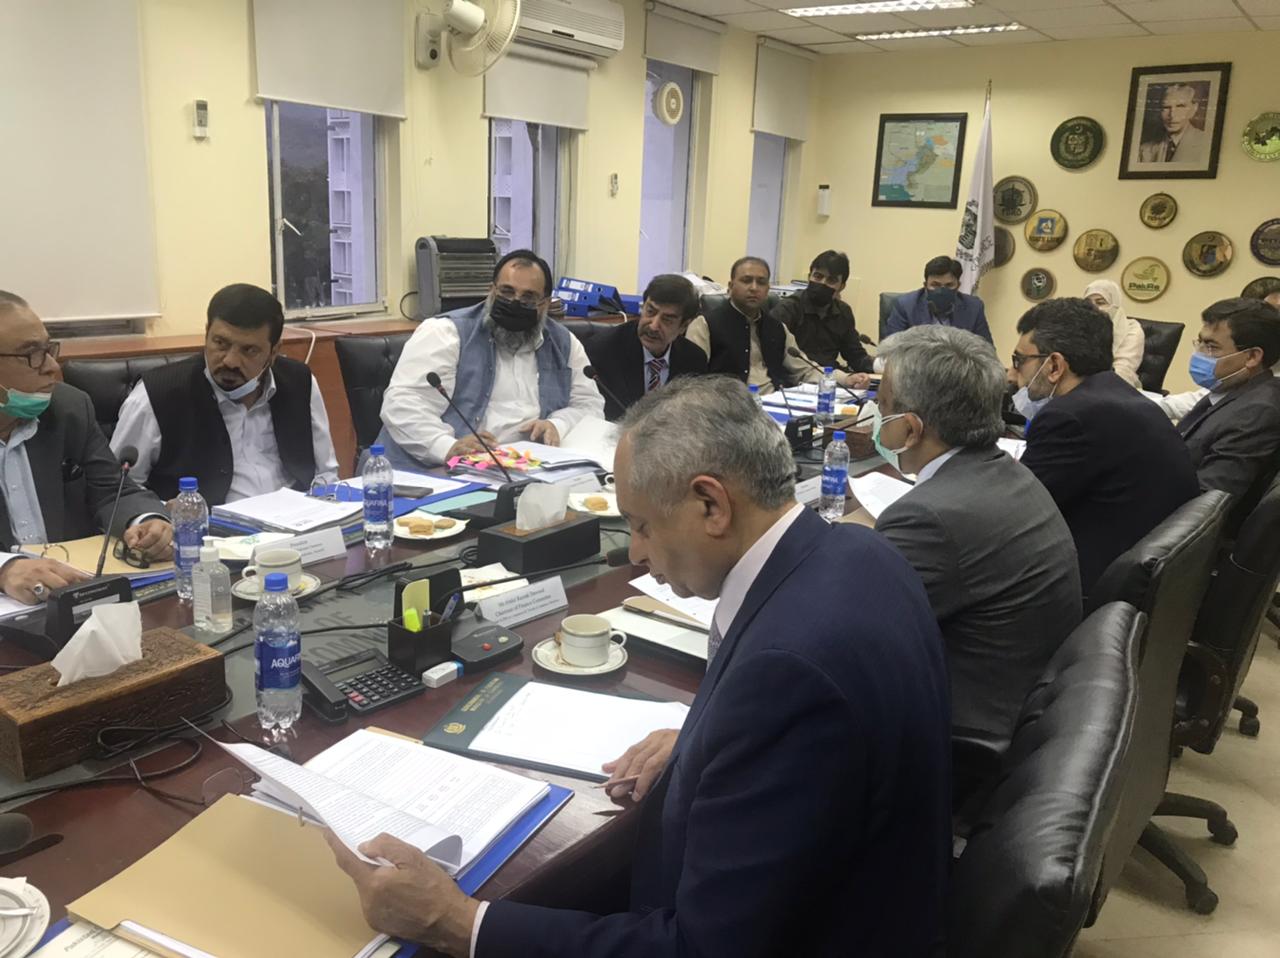 On 18th March 2021, the 19th Finance Committee meeting of the Export Development Fund (EDF) Board, was held under the Chairmanship of Honorable Mr. Abdul Razzak Dawood, Advisor to Prime Minister on Commerce and Investment, Ministry of Commerce, Pak Secretariat. Wherein, Senior Vice President SCCI, Mr. Khurram Aslam appreciated the approval of funds for the continuation of the Child Labor Elimination Program initiated for the Soccer Ball Industry of Sialkot.